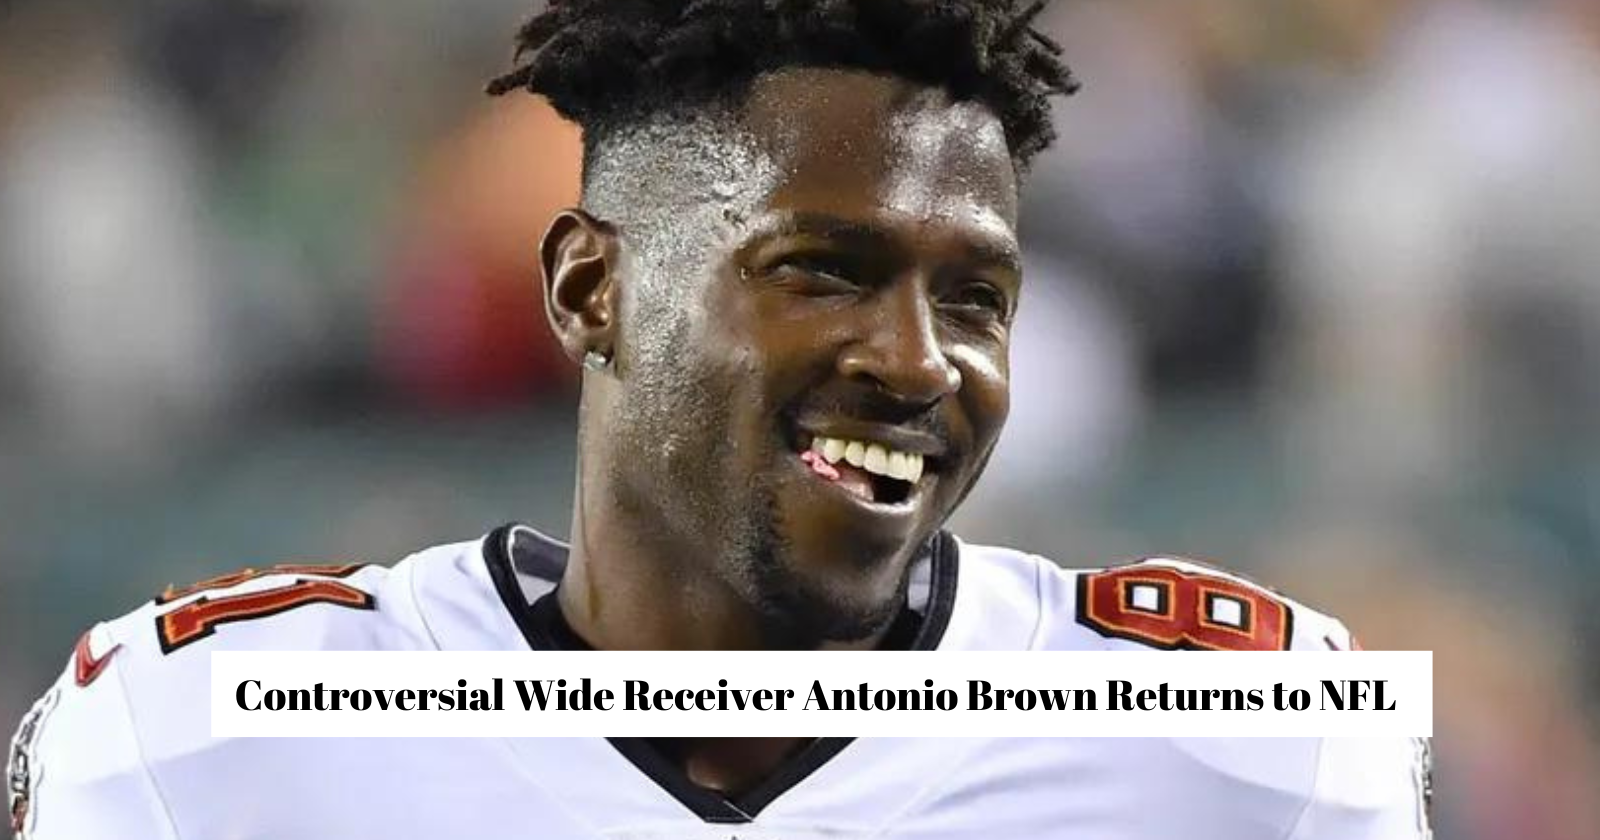 Controversial Wide Receiver Antonio Brown Returns to NFL